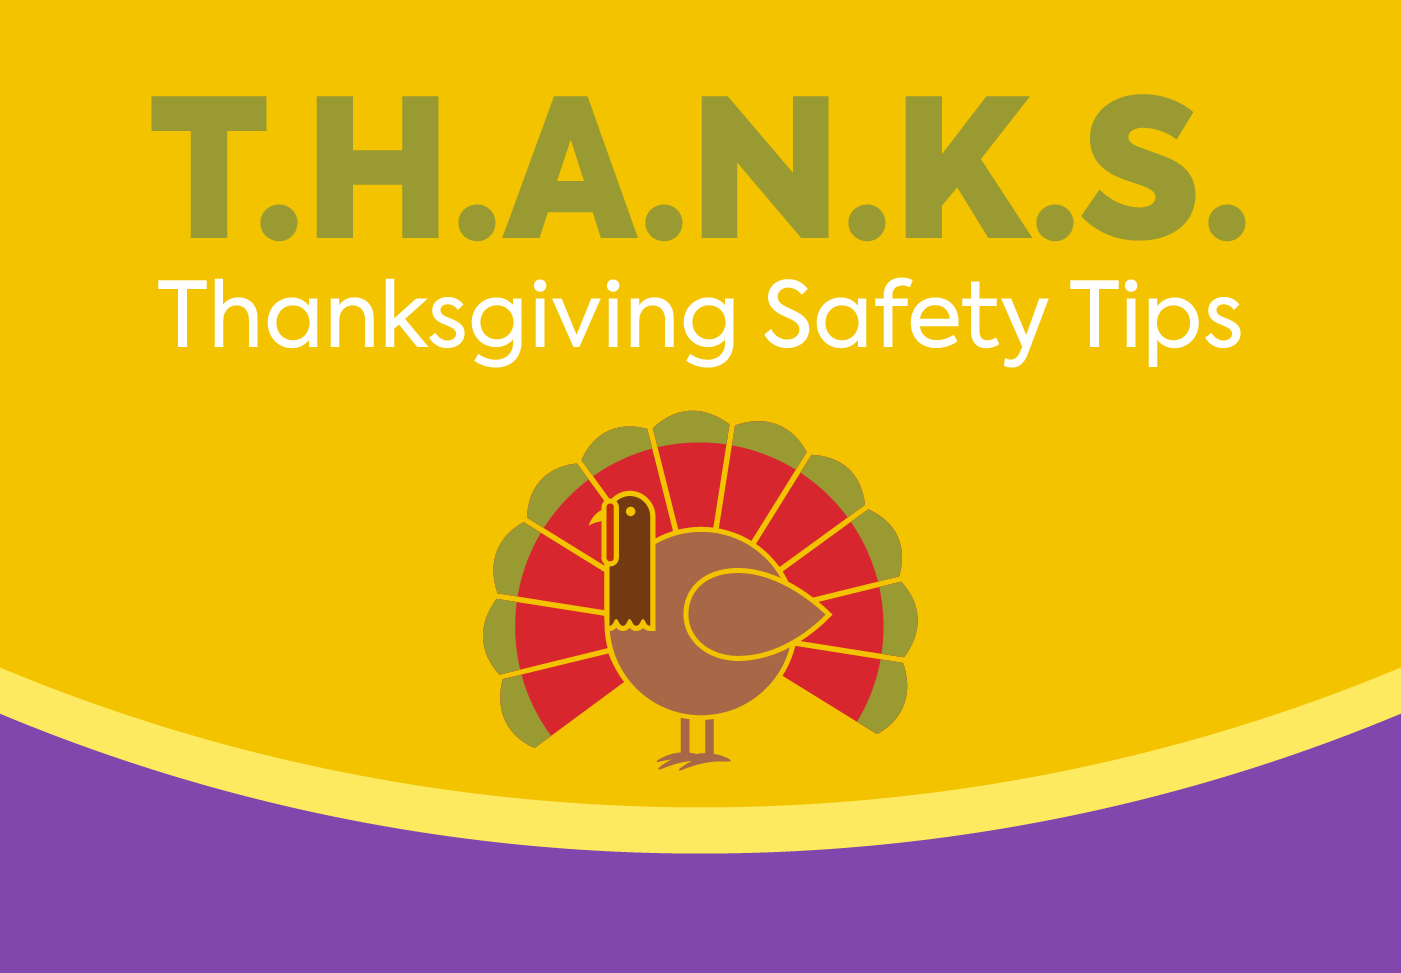 Illustration of a turkey and text T.H.A.N.K.S Thanksgiving Safety Tips.